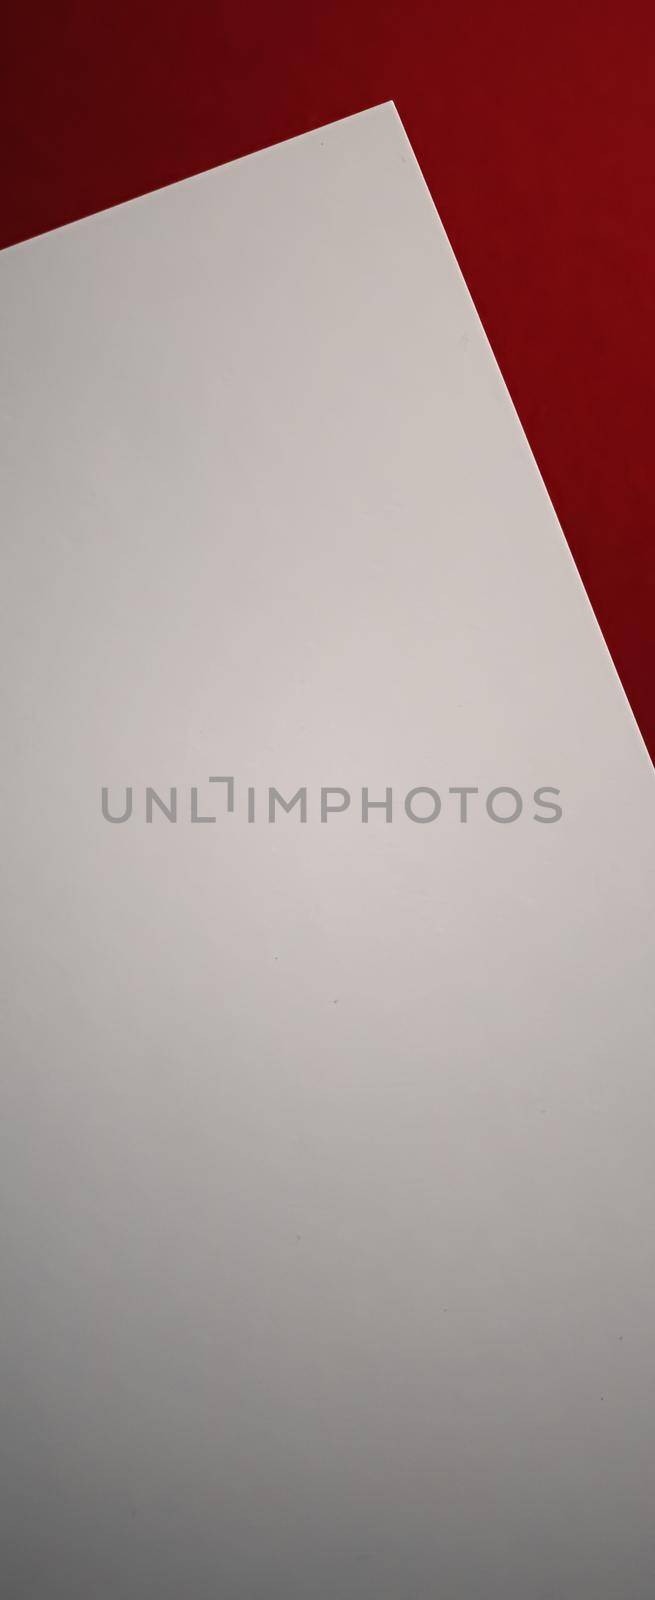 Blank A4 paper, white on red background as office stationery flatlay, luxury branding flat lay and brand identity design for mockup by Anneleven